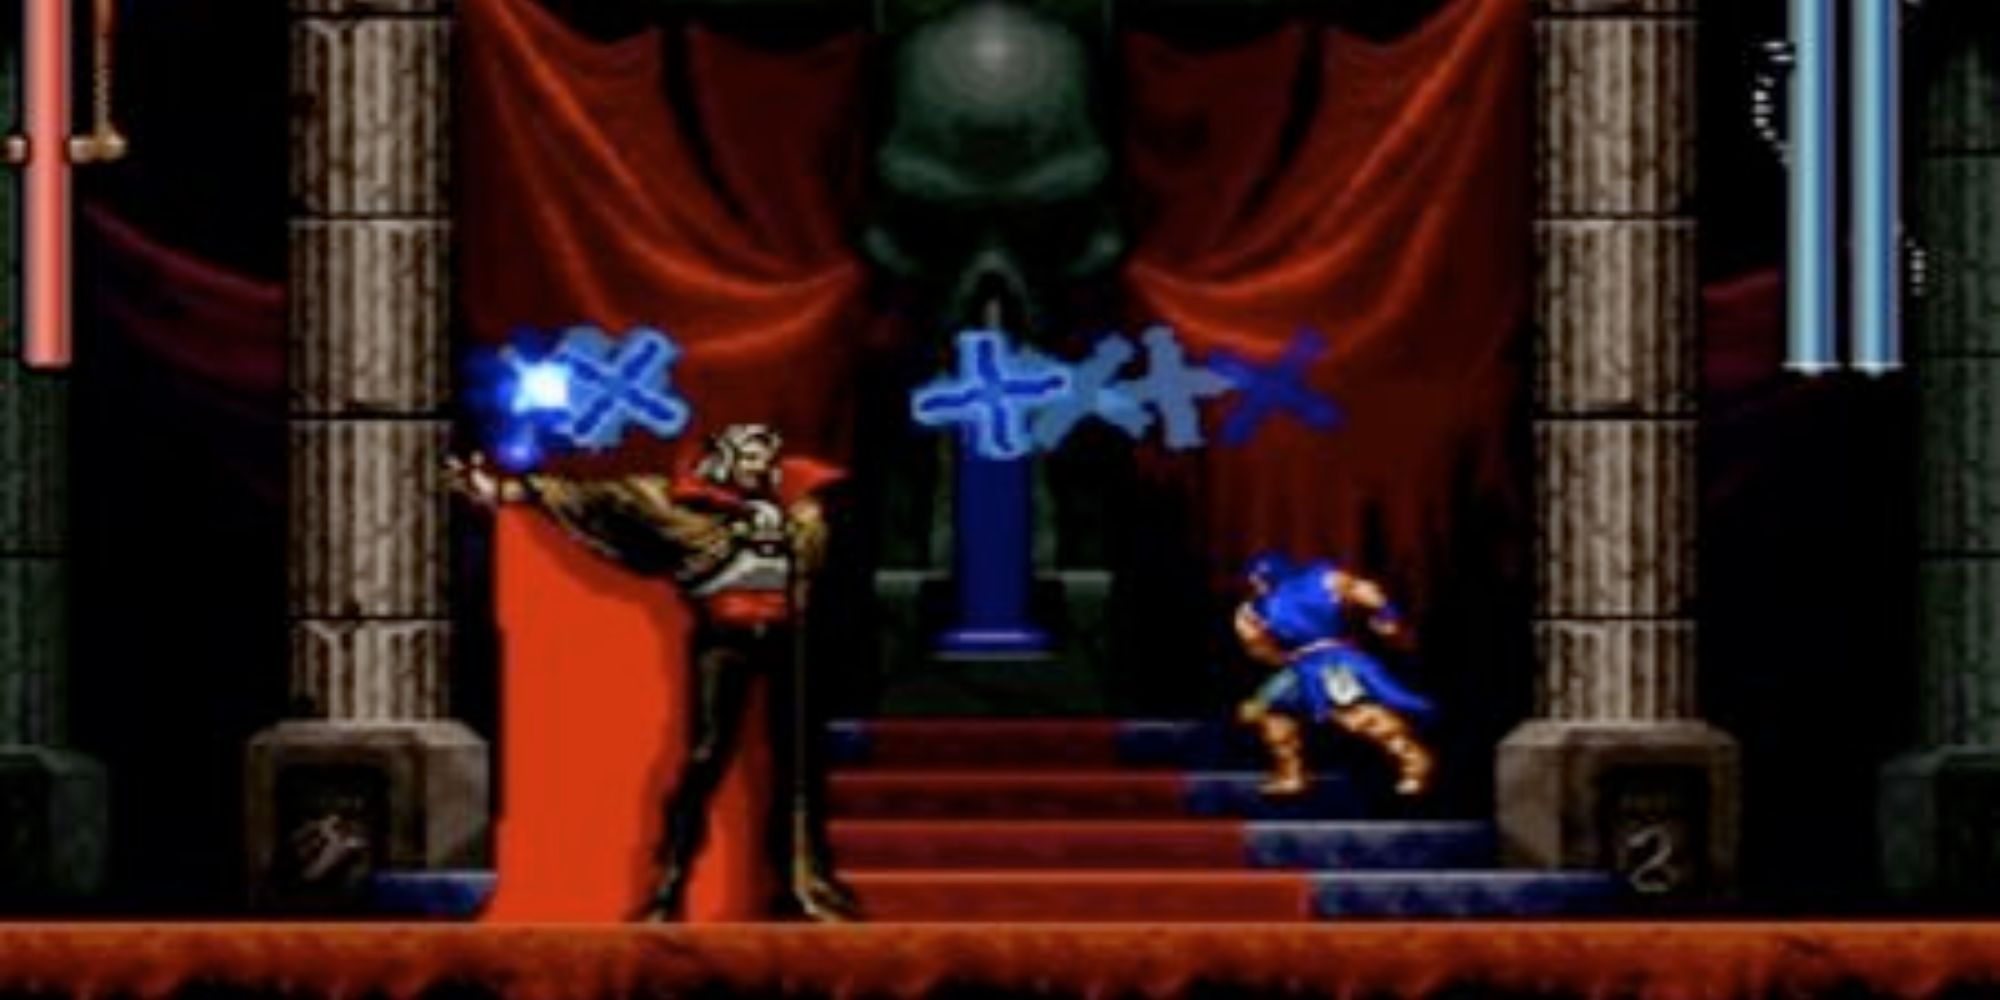 castlevania draculas throne room where belmont and dracua are fighting